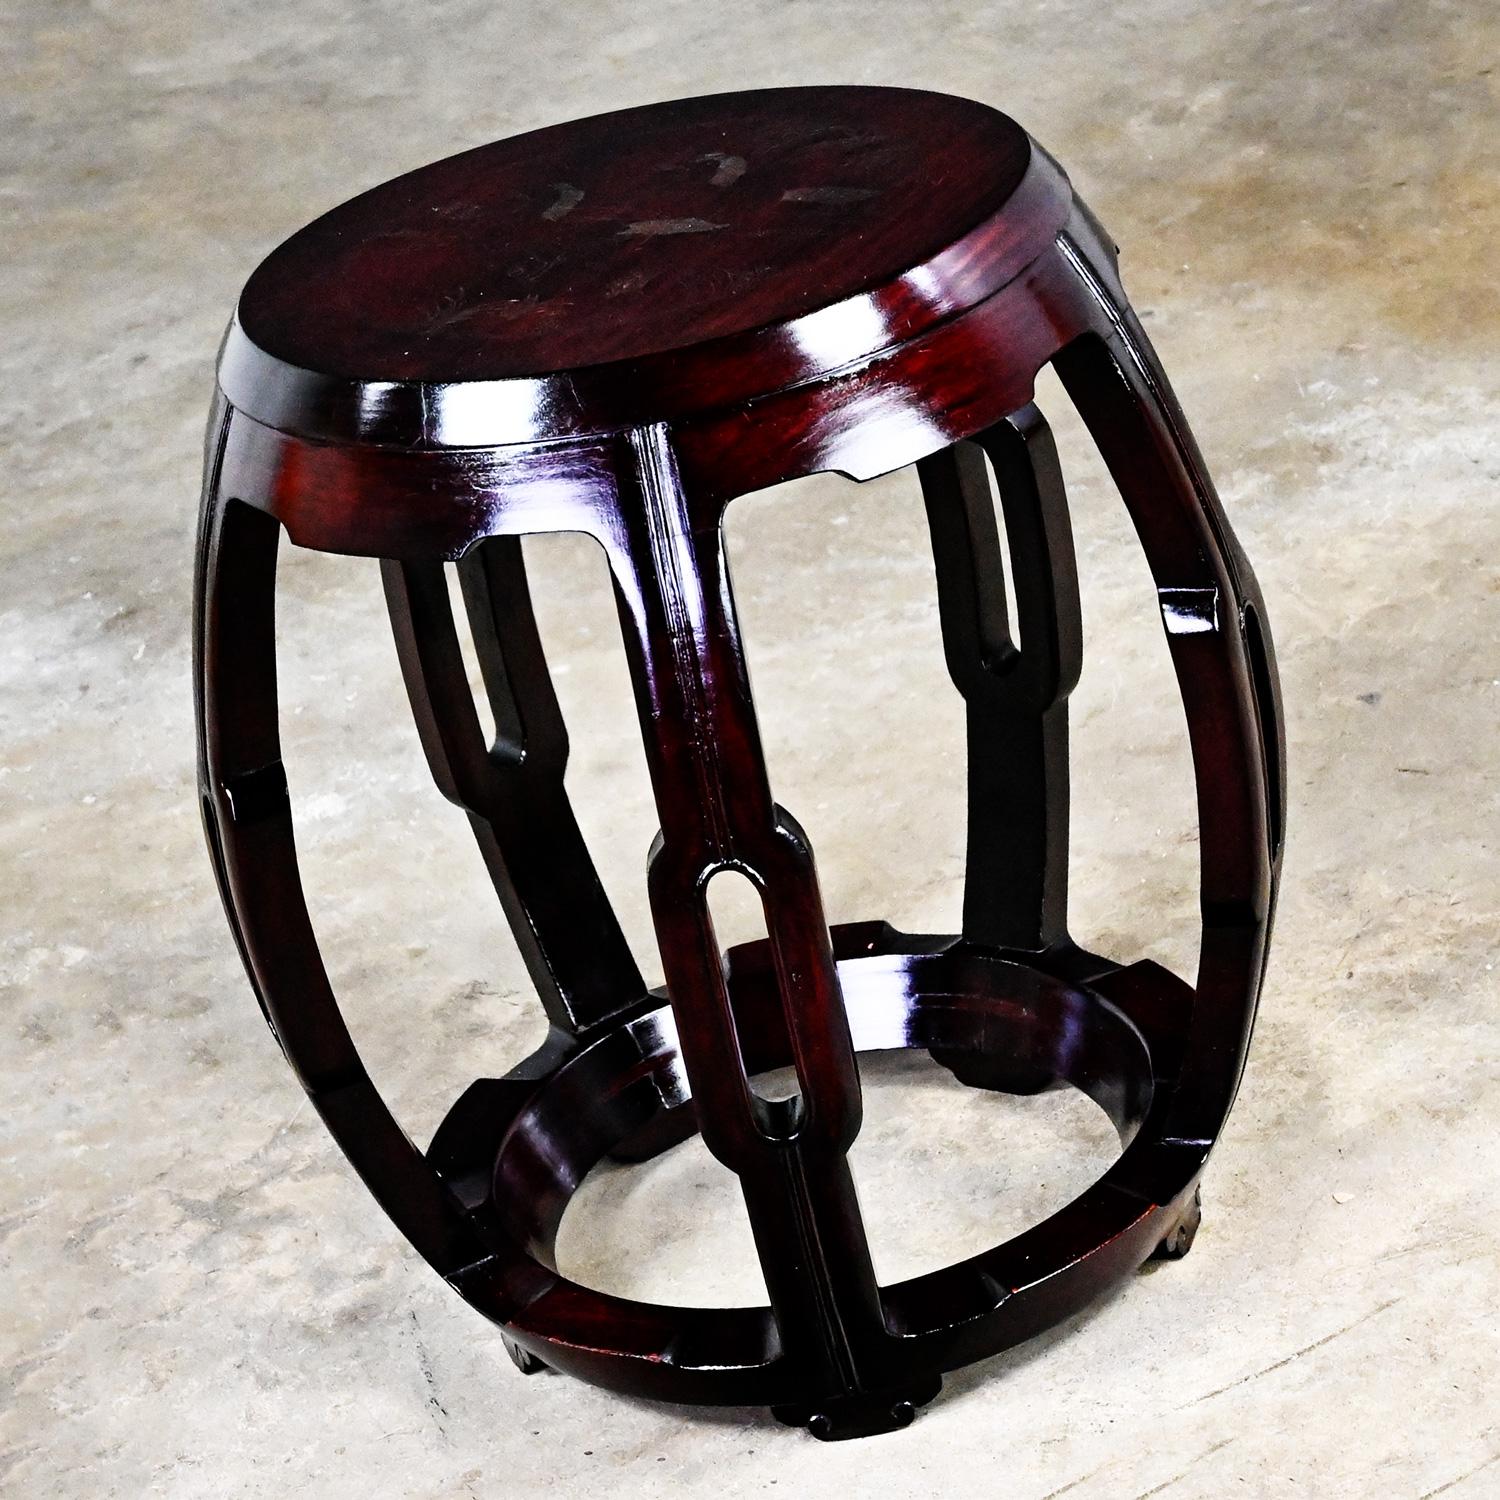 Mid 20th Century Chinoiserie Asian Rosewood Barrel Drum Table or Garden Stool For Sale 8